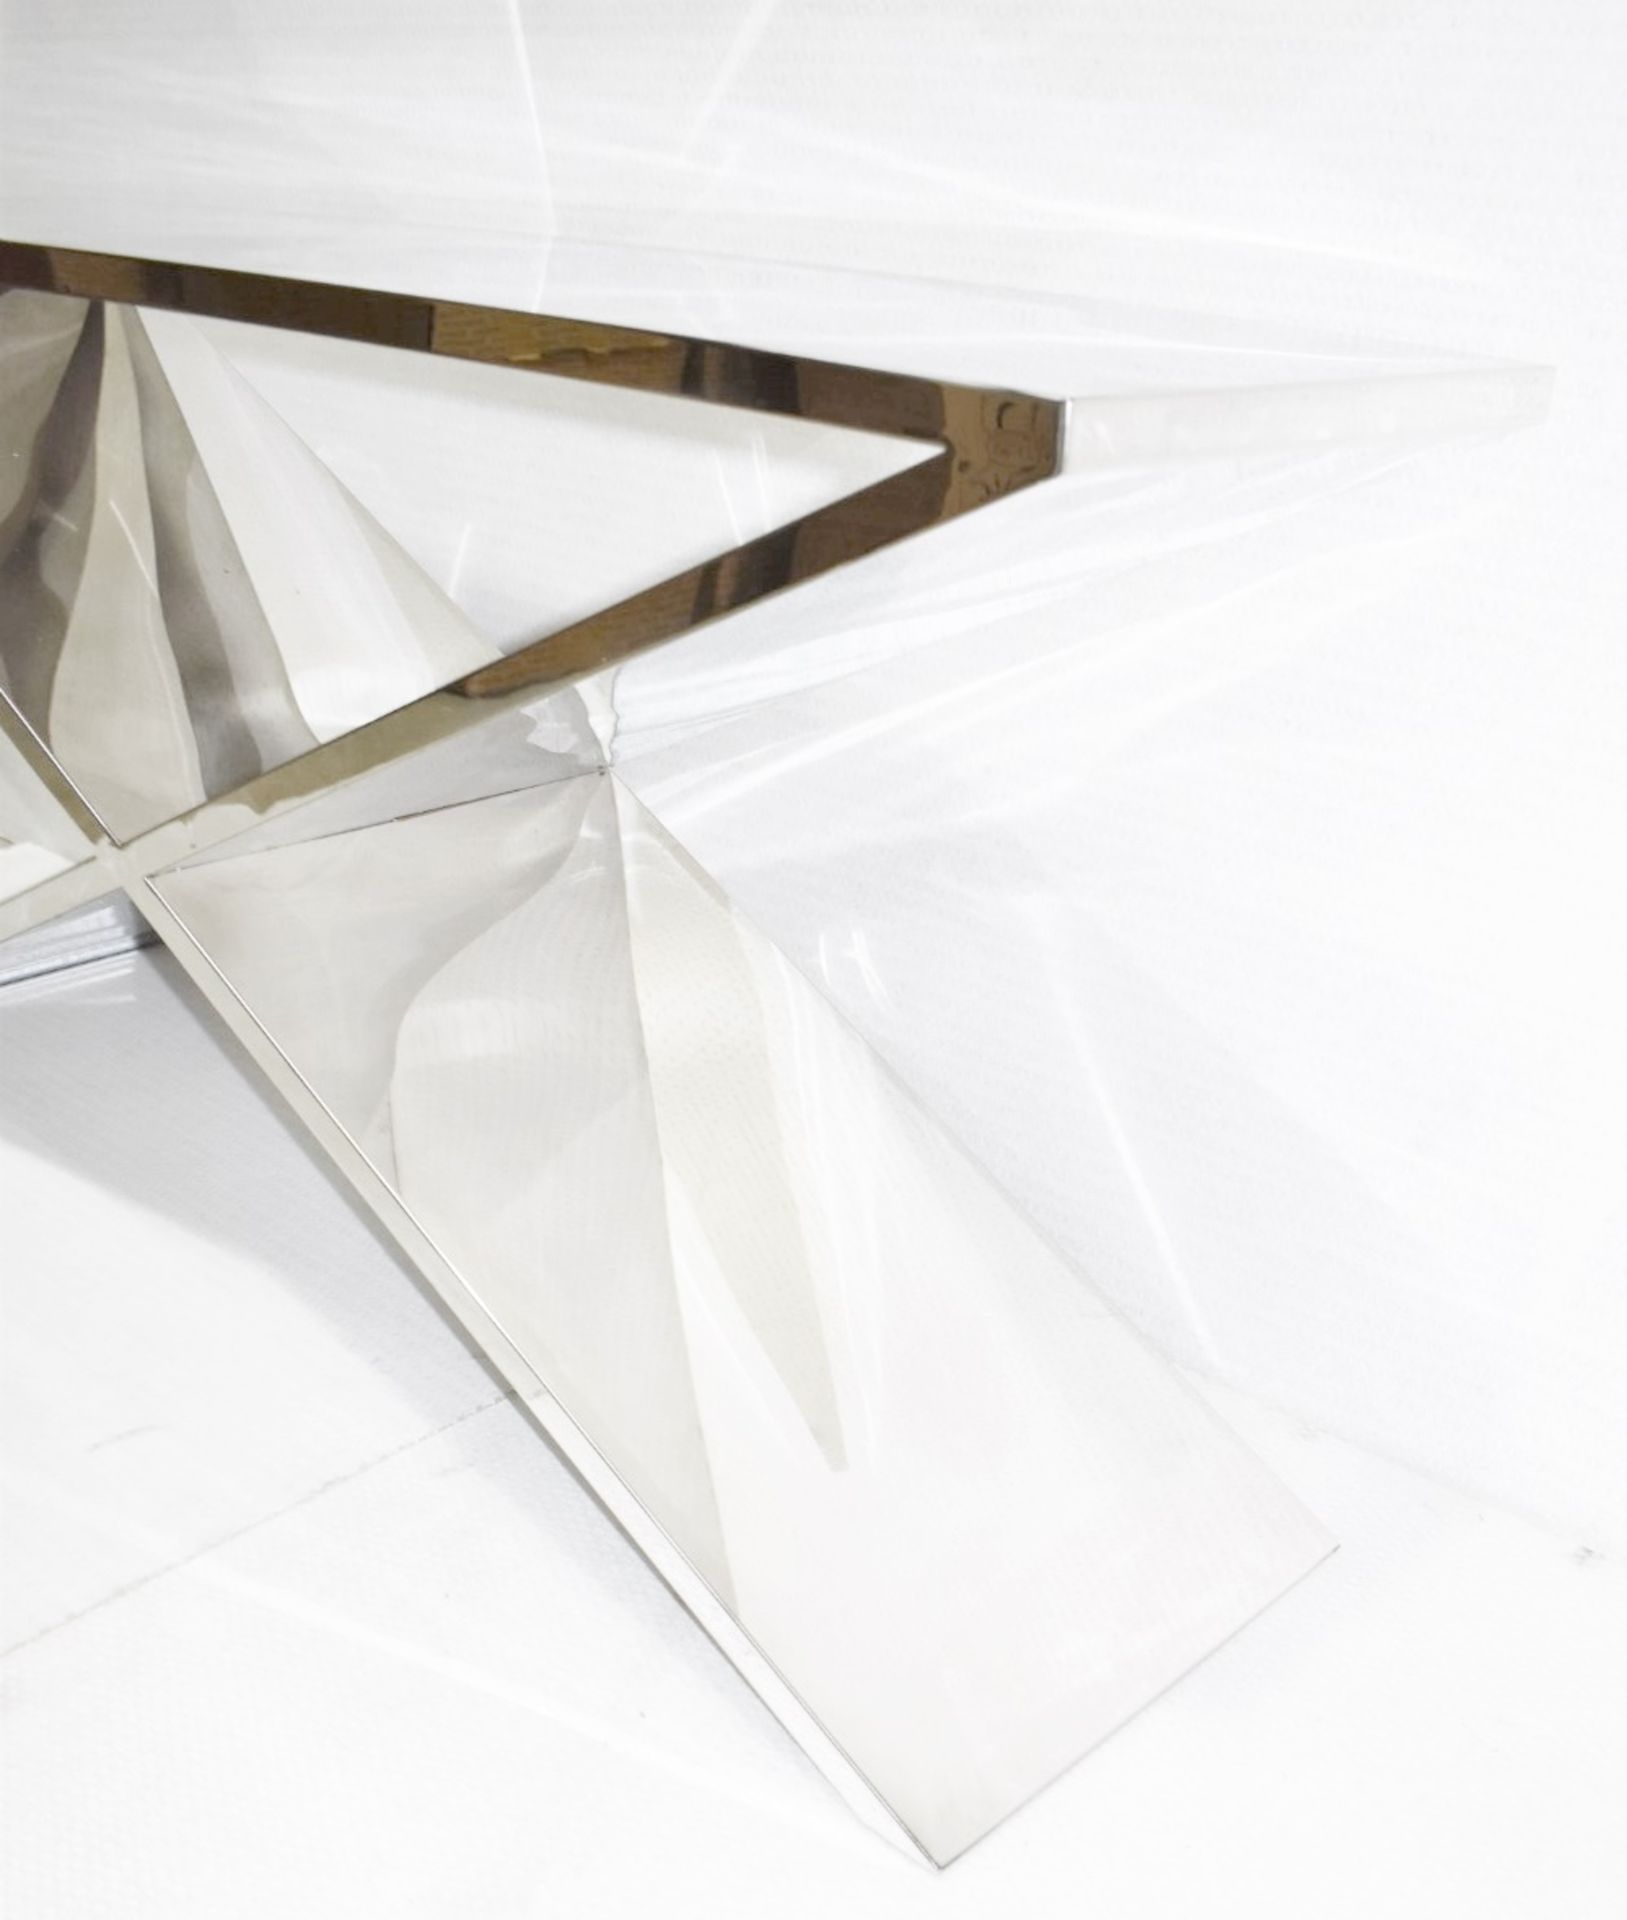 1 x EICHHOLTZ 'Metropole' Luxury Handcrafted Mirrored Console Table - Original Price £2,810 - Image 5 of 10